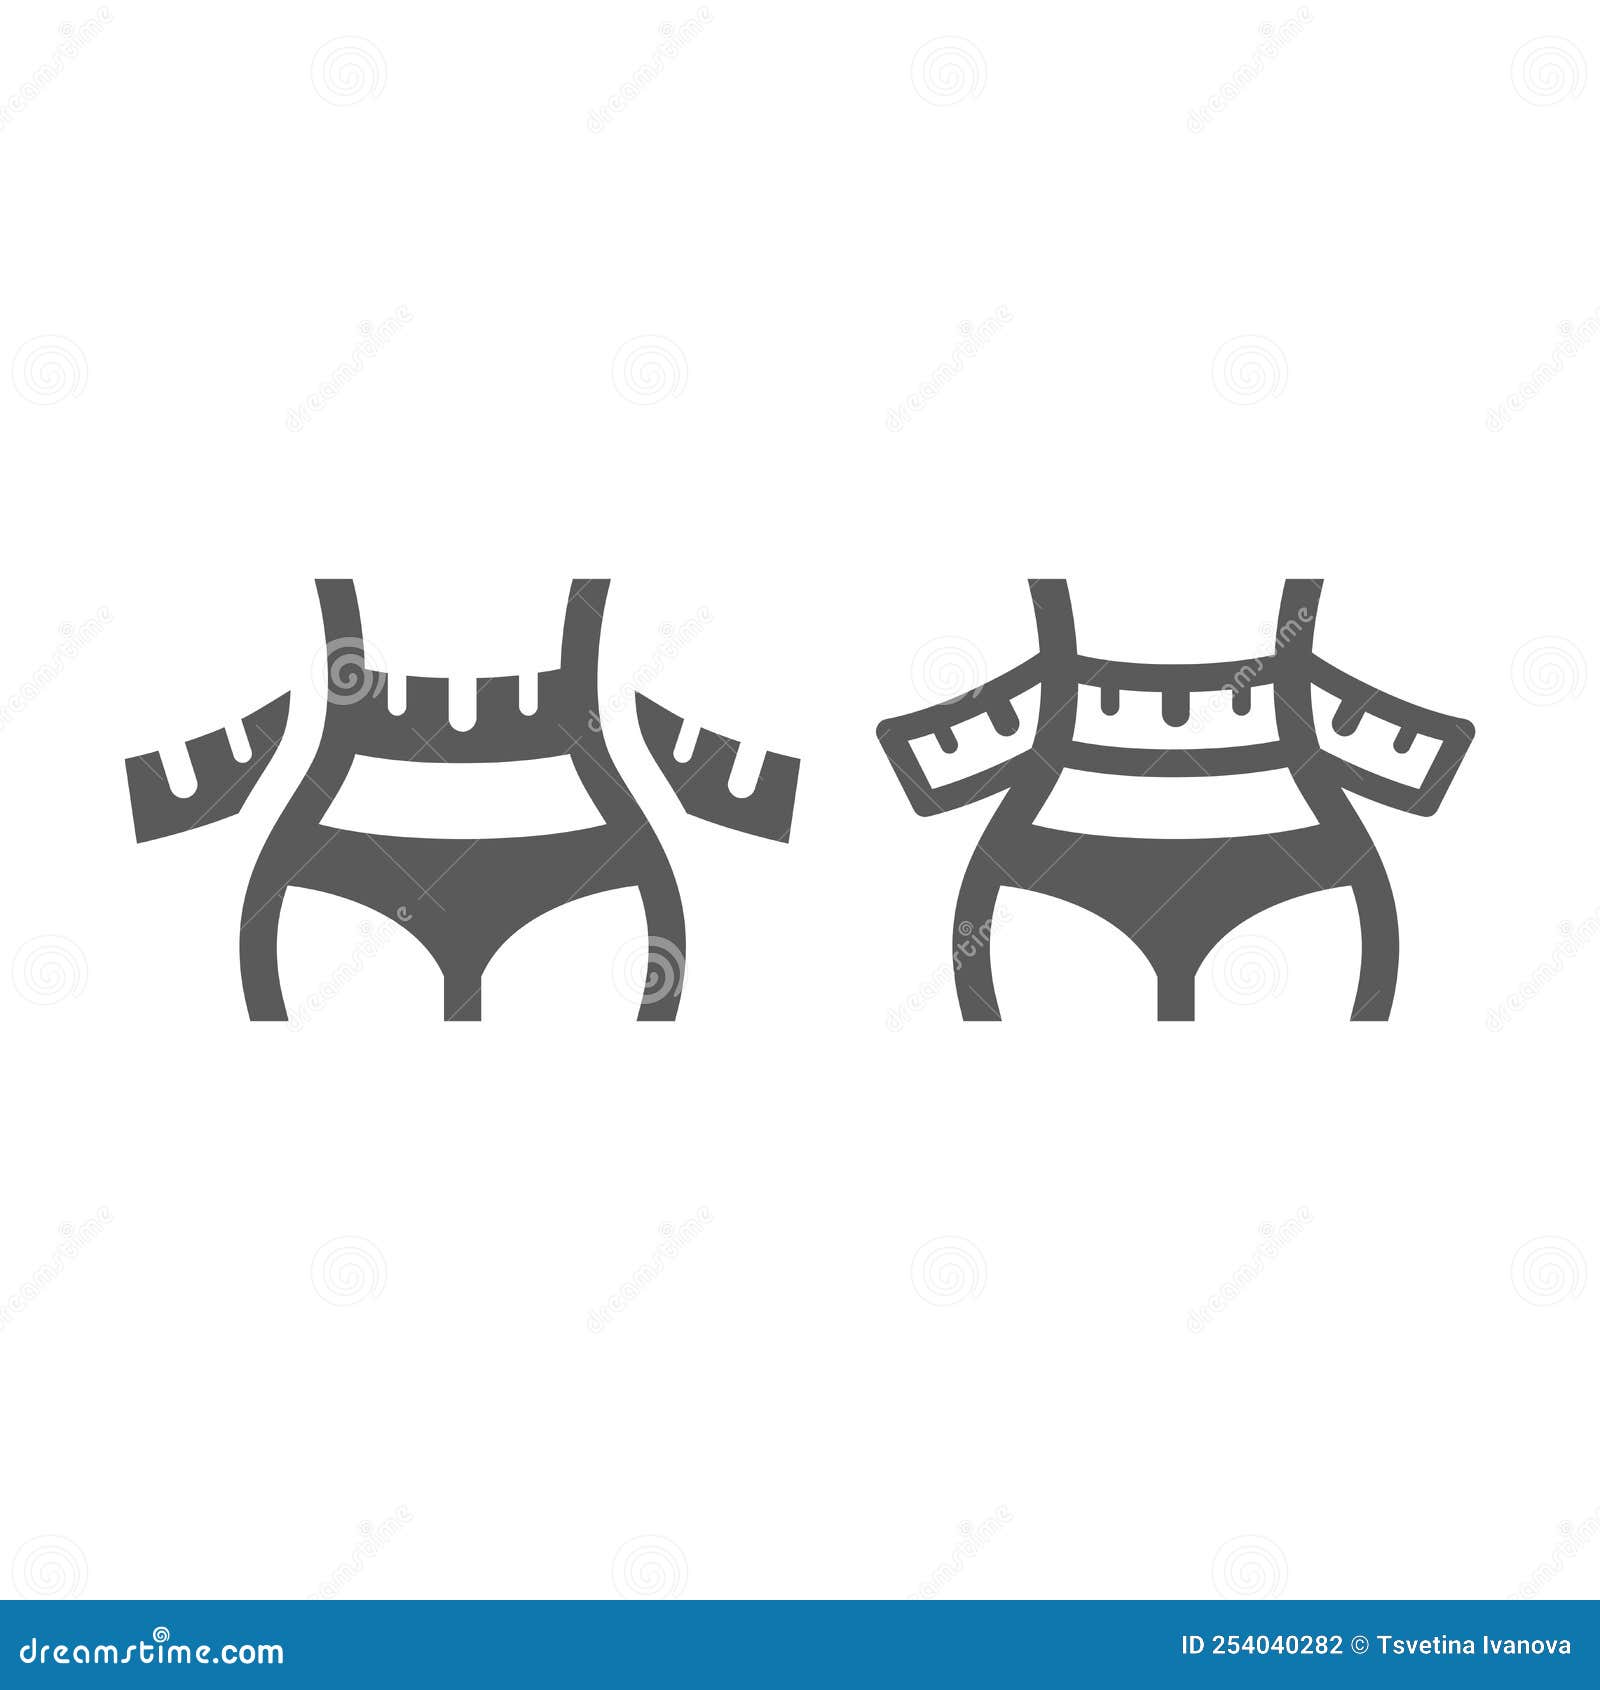 https://thumbs.dreamstime.com/z/female-waist-belly-measuring-tape-vector-icon-woman-fit-body-weight-loss-filled-symbol-female-waist-belly-measuring-254040282.jpg